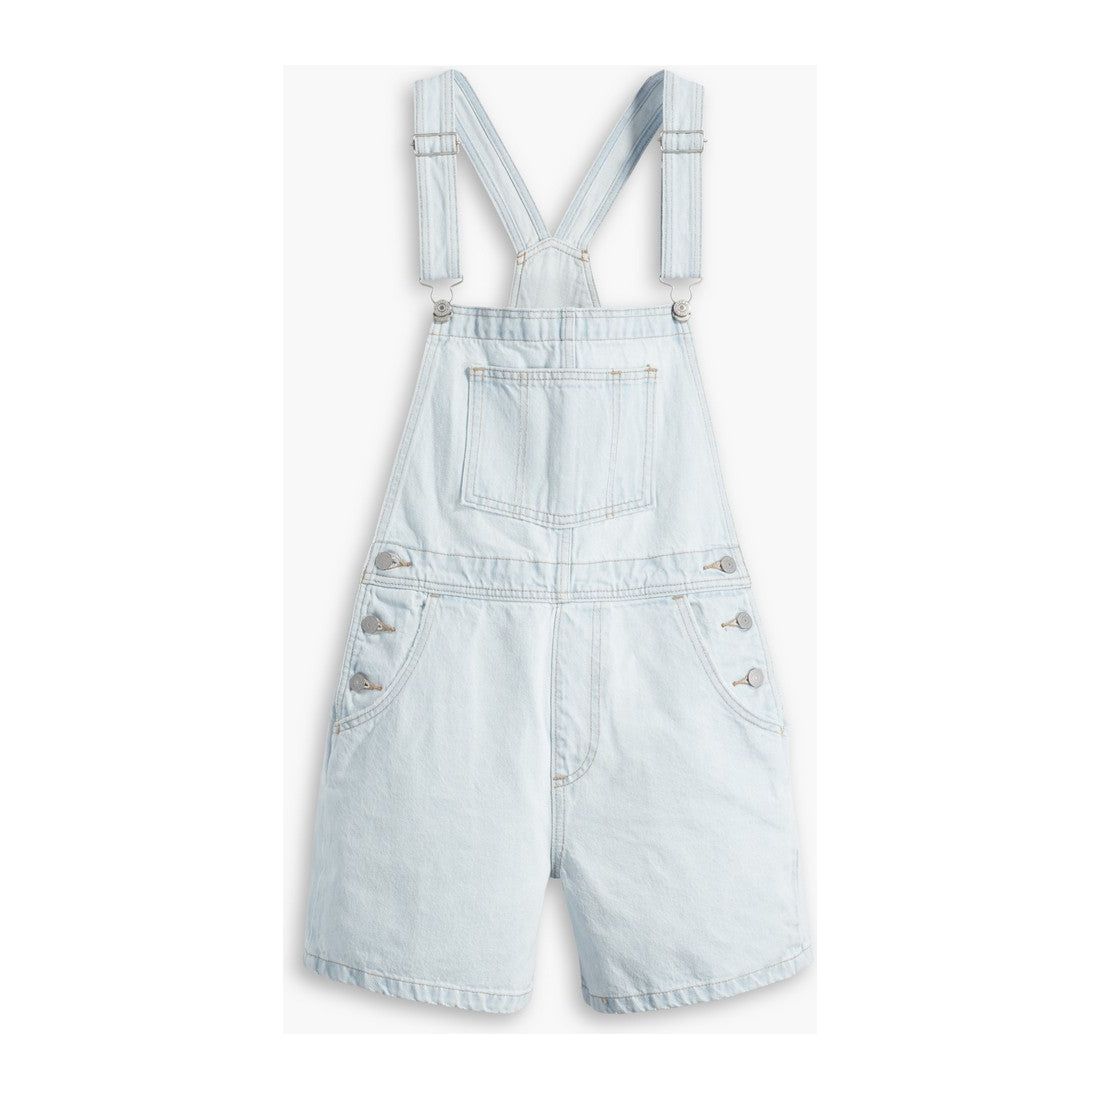 Levi - Vintage Shortall in Changing Expectations